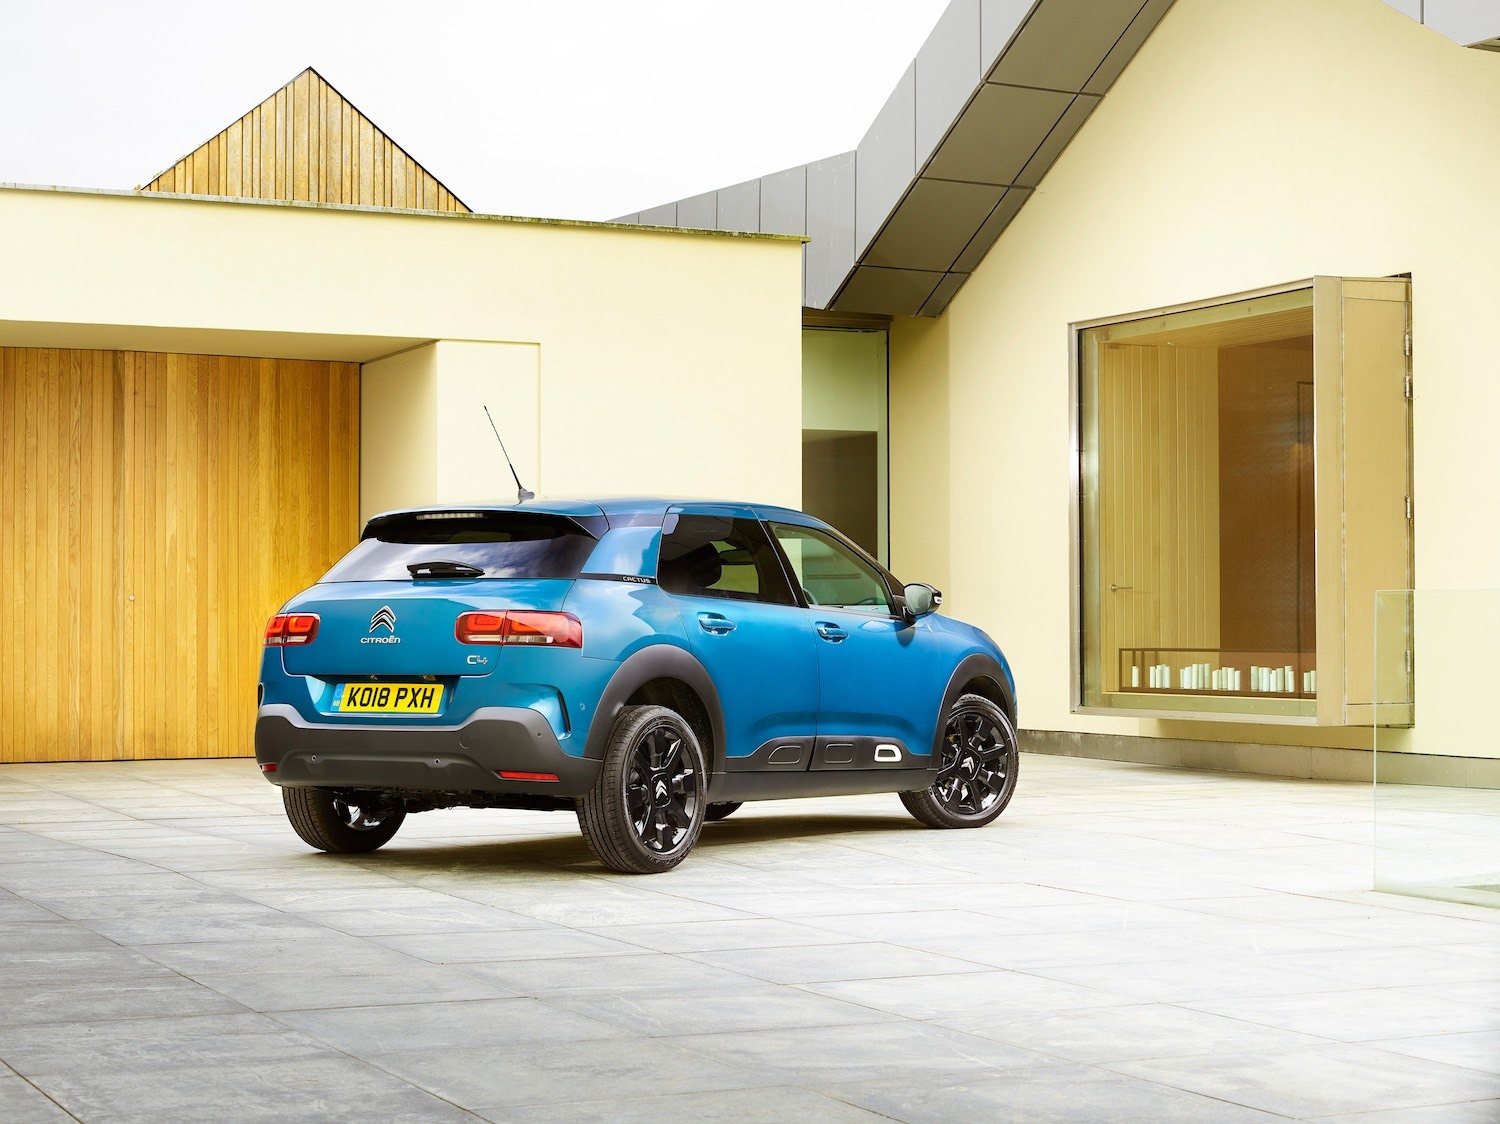 Tom Scanlan reviews the New Citroen Cactus for Drive 2